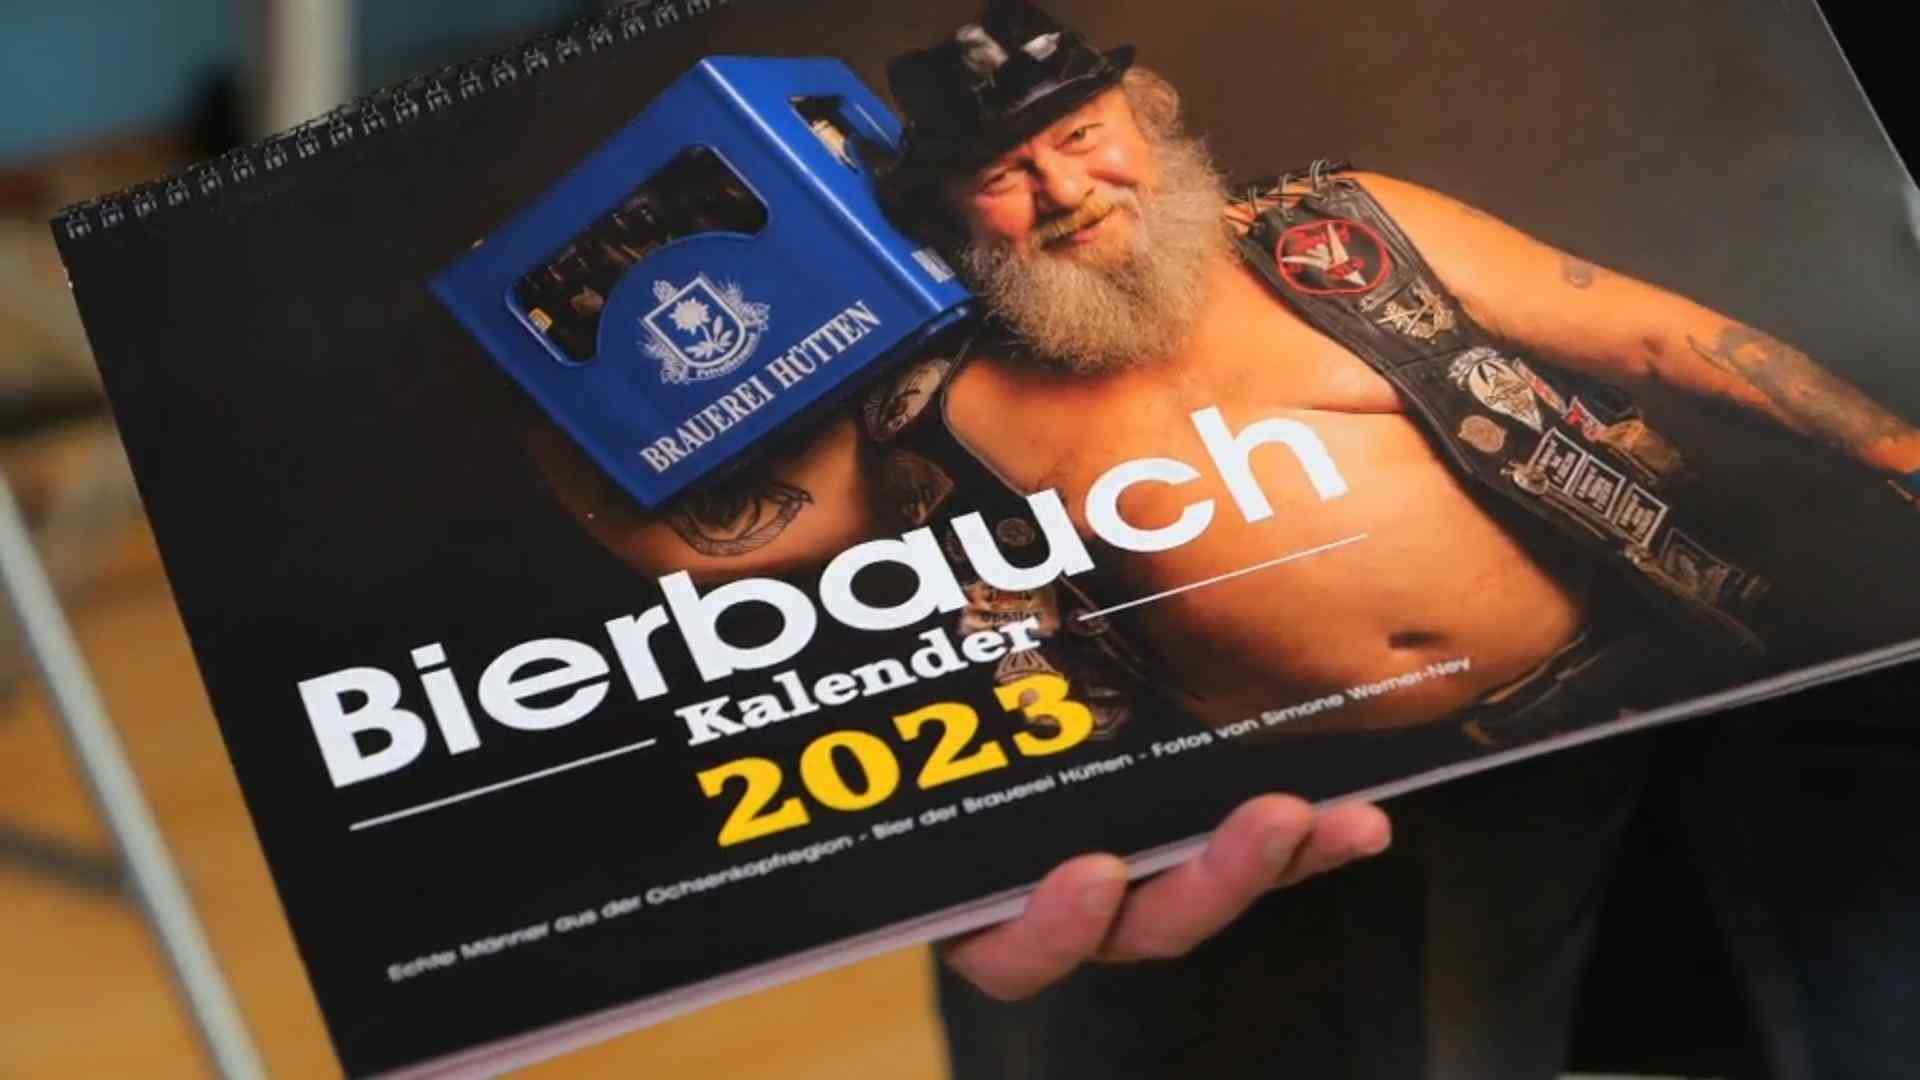 Barrel instead of six-pack: brewery prints beer belly calendar "The girls love it!"